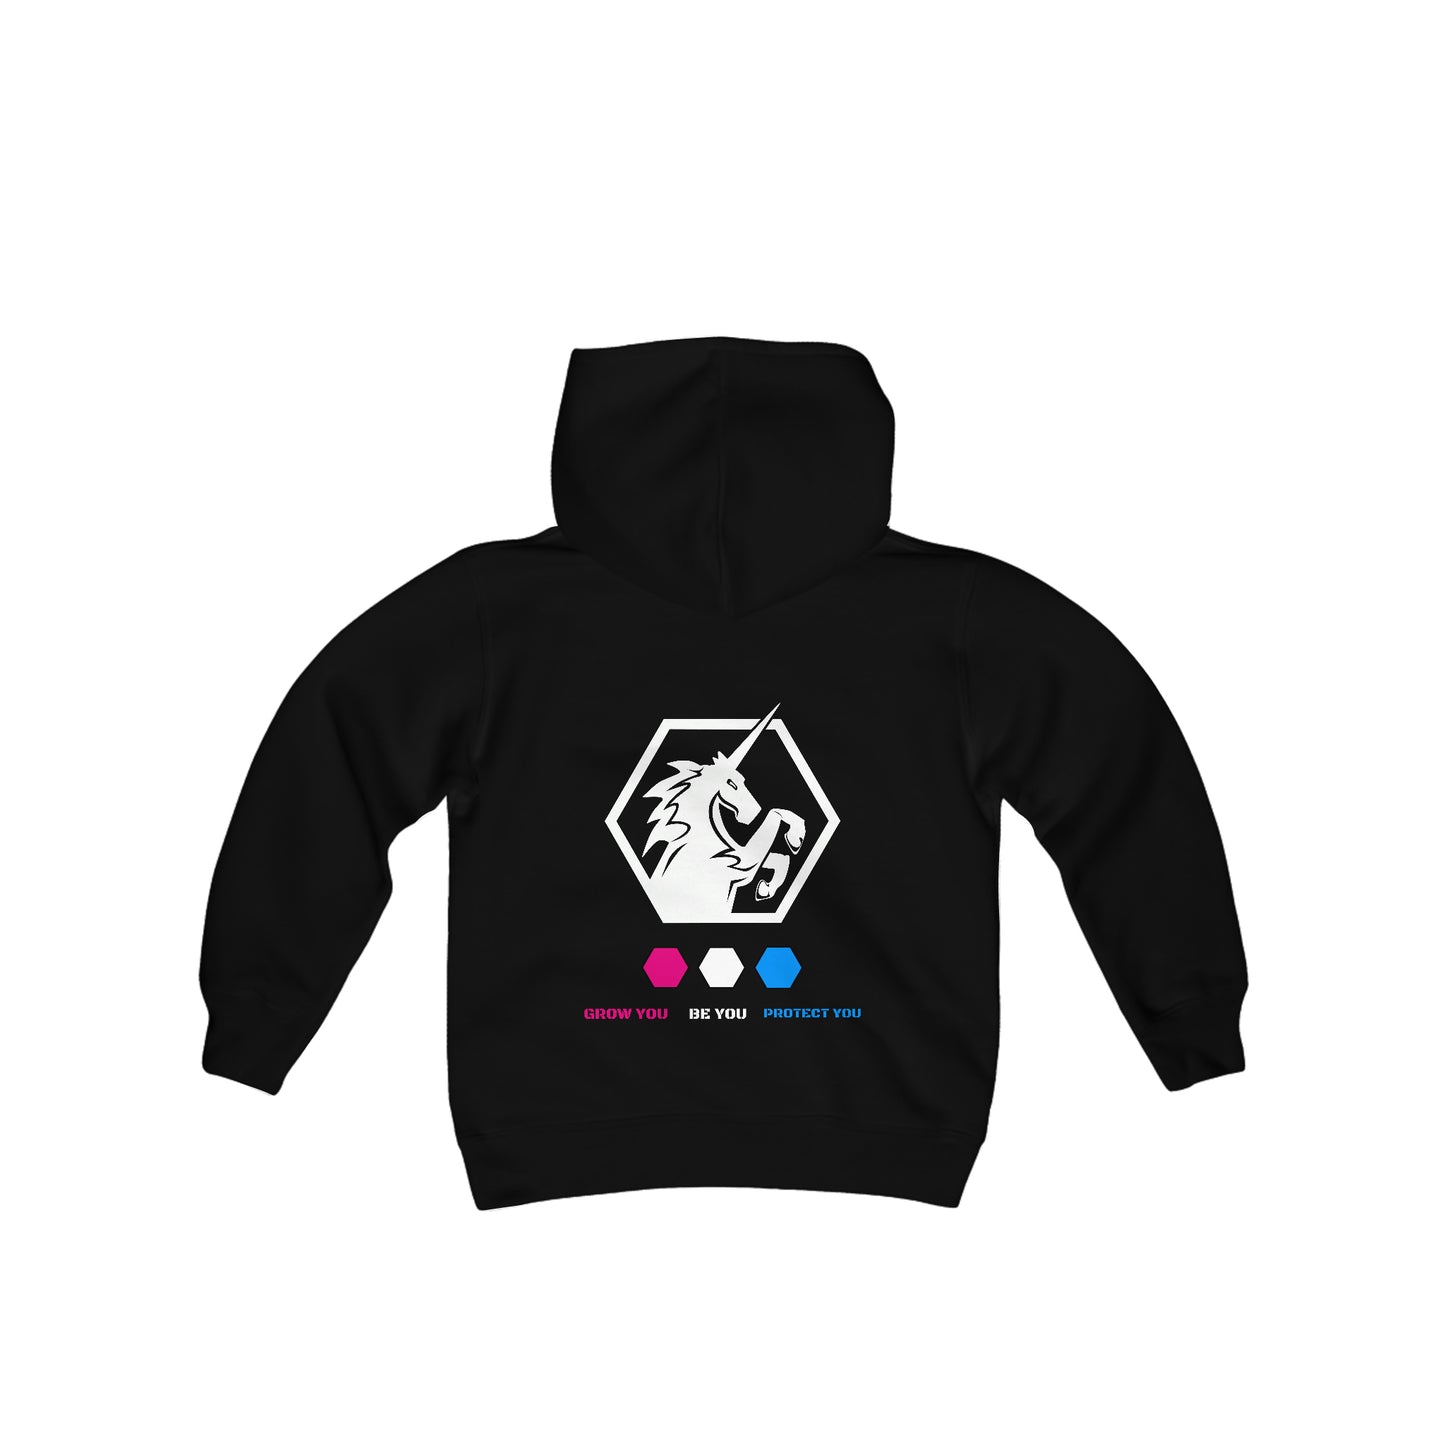 Hoodies for the Youth!